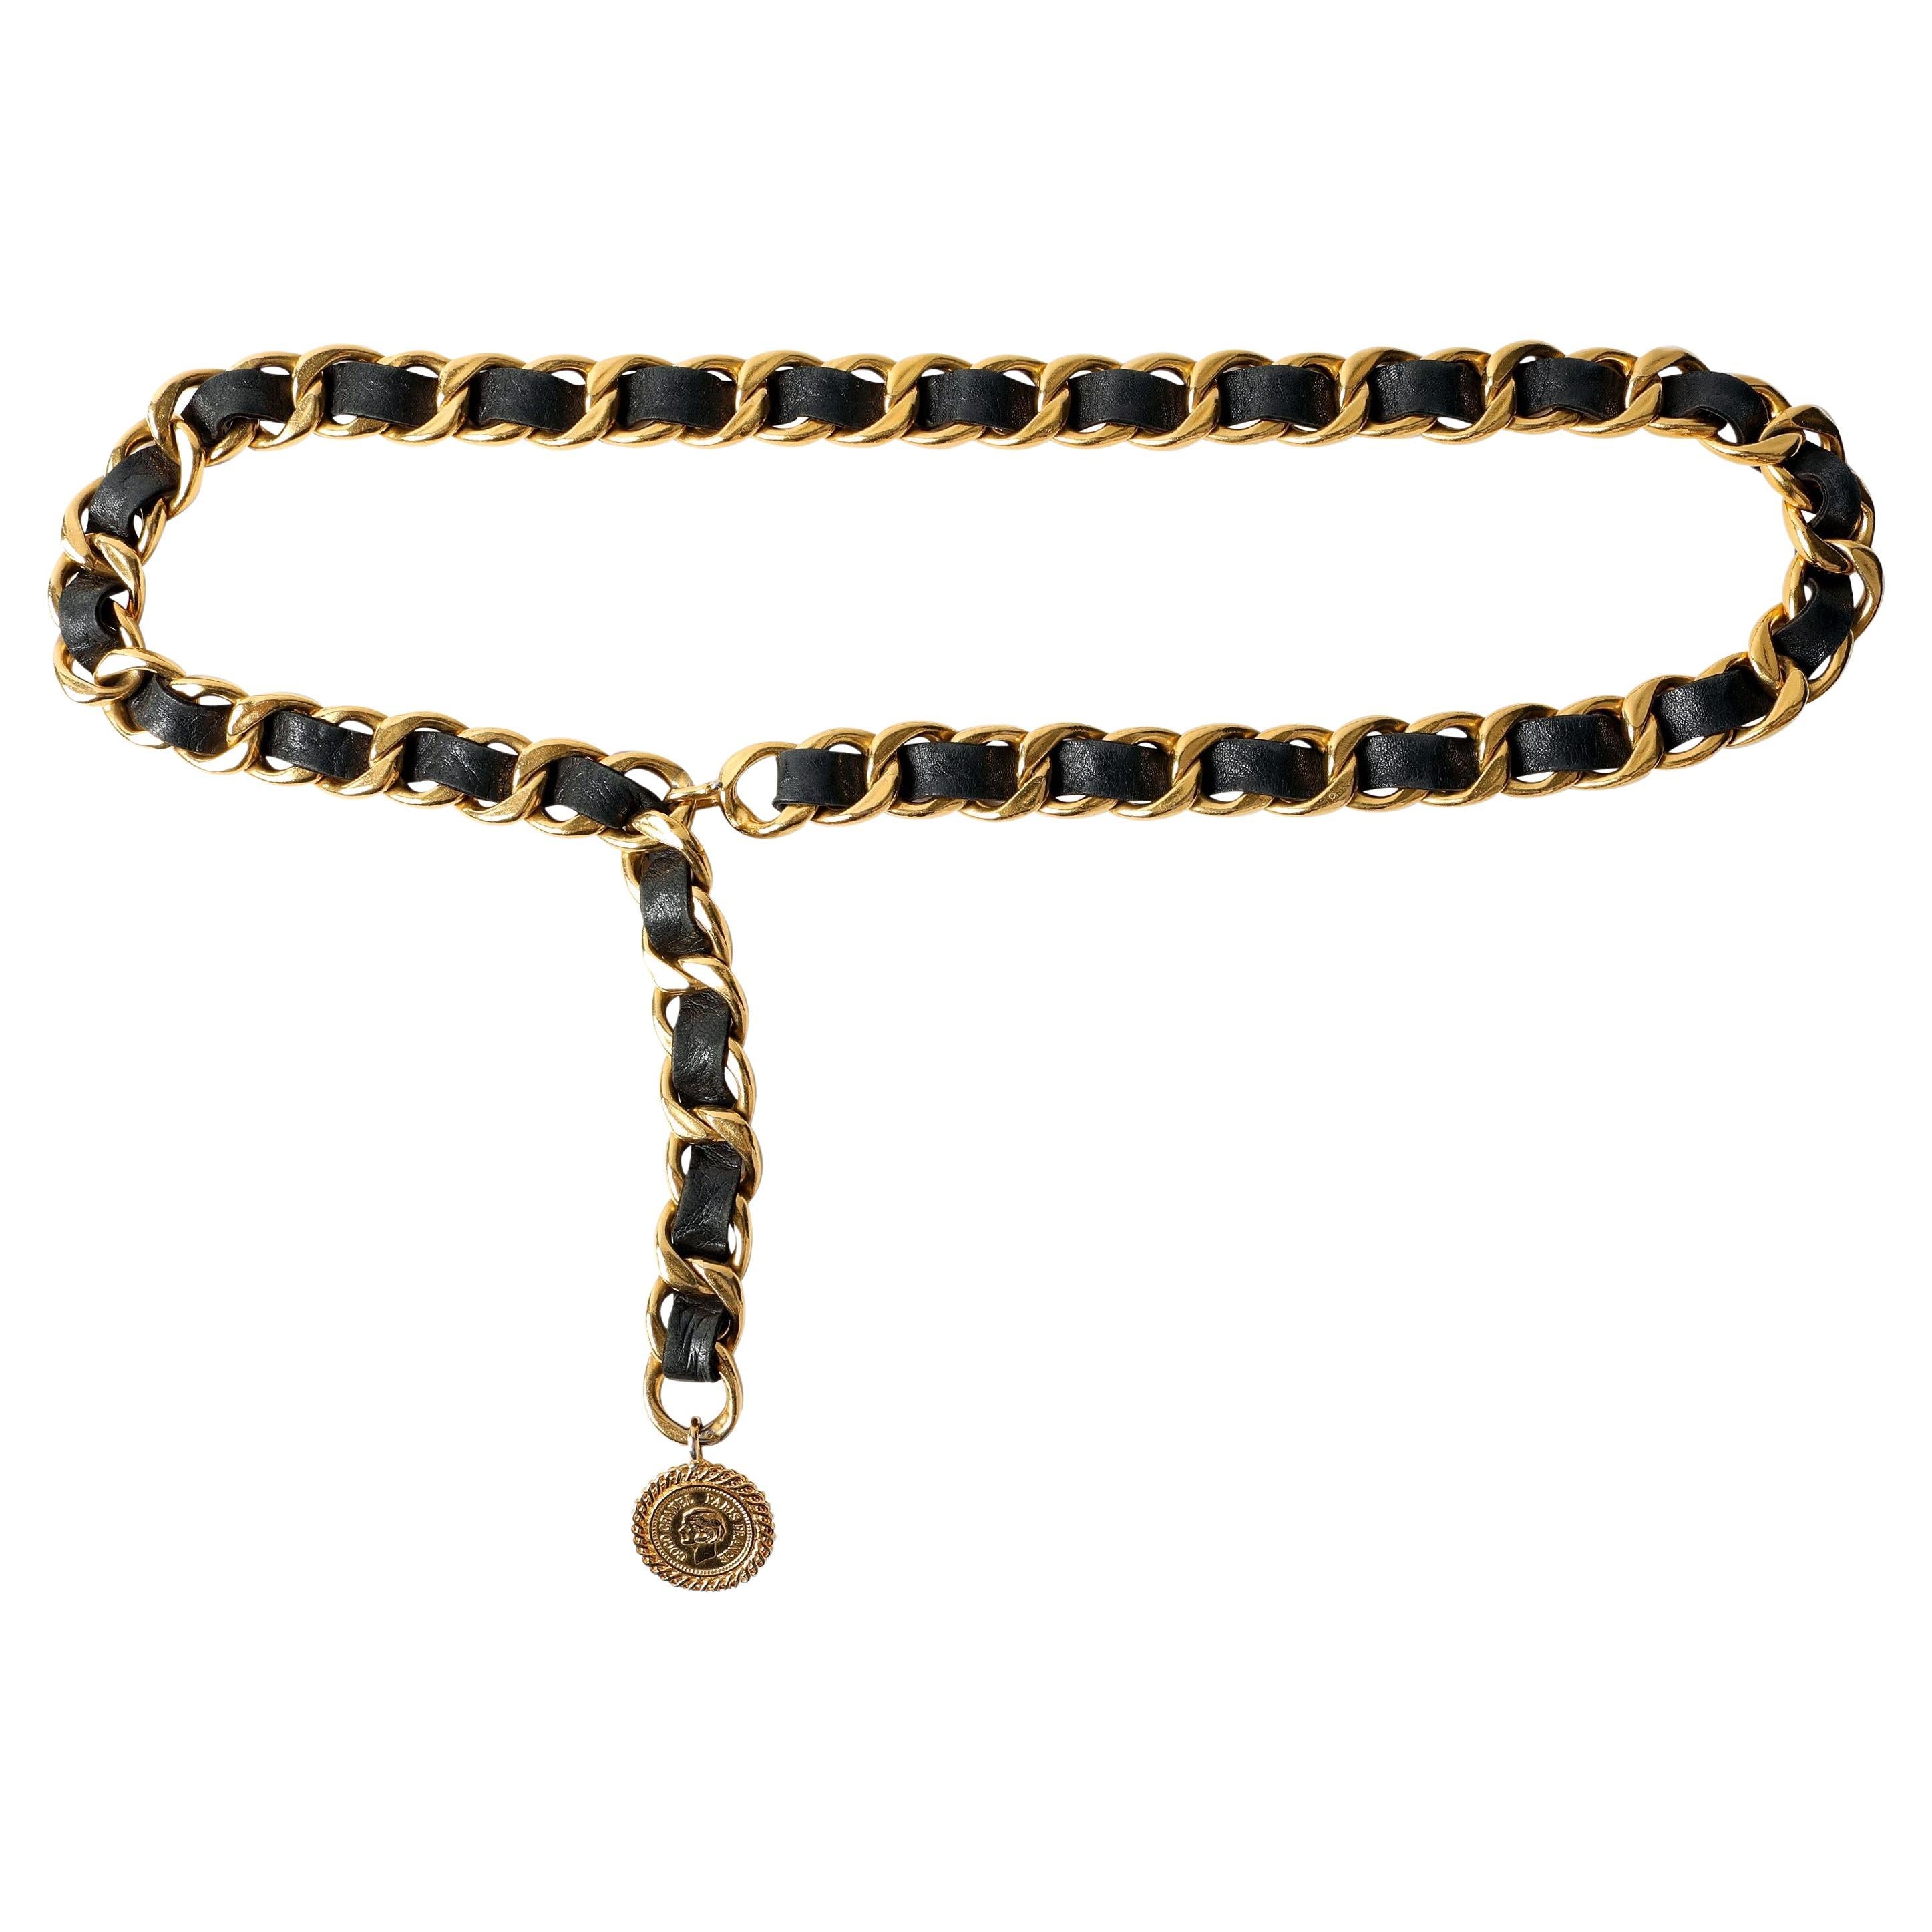 Chanel Black Leather and Gold Chain with Charm Vintage Belt